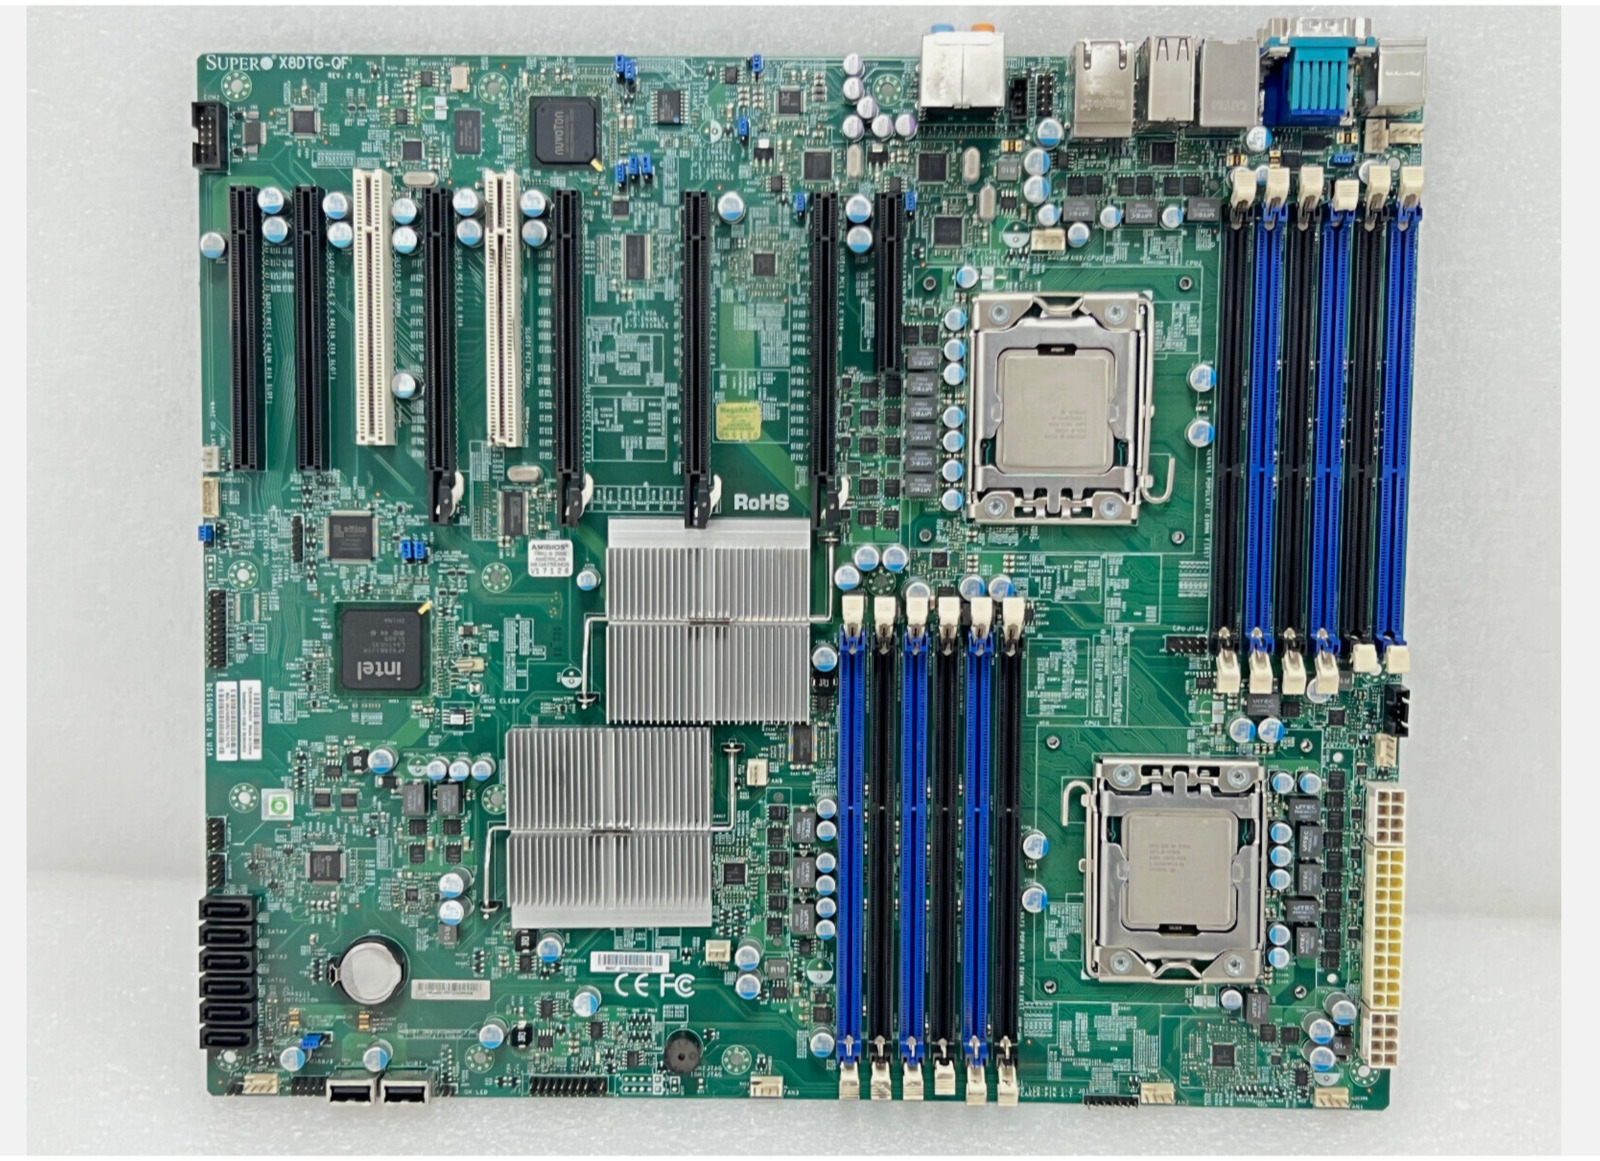 SuperMicro  X8DTG-QF DDR3, 6 SATA (3 Gbps) Server Mother Board Great Condition